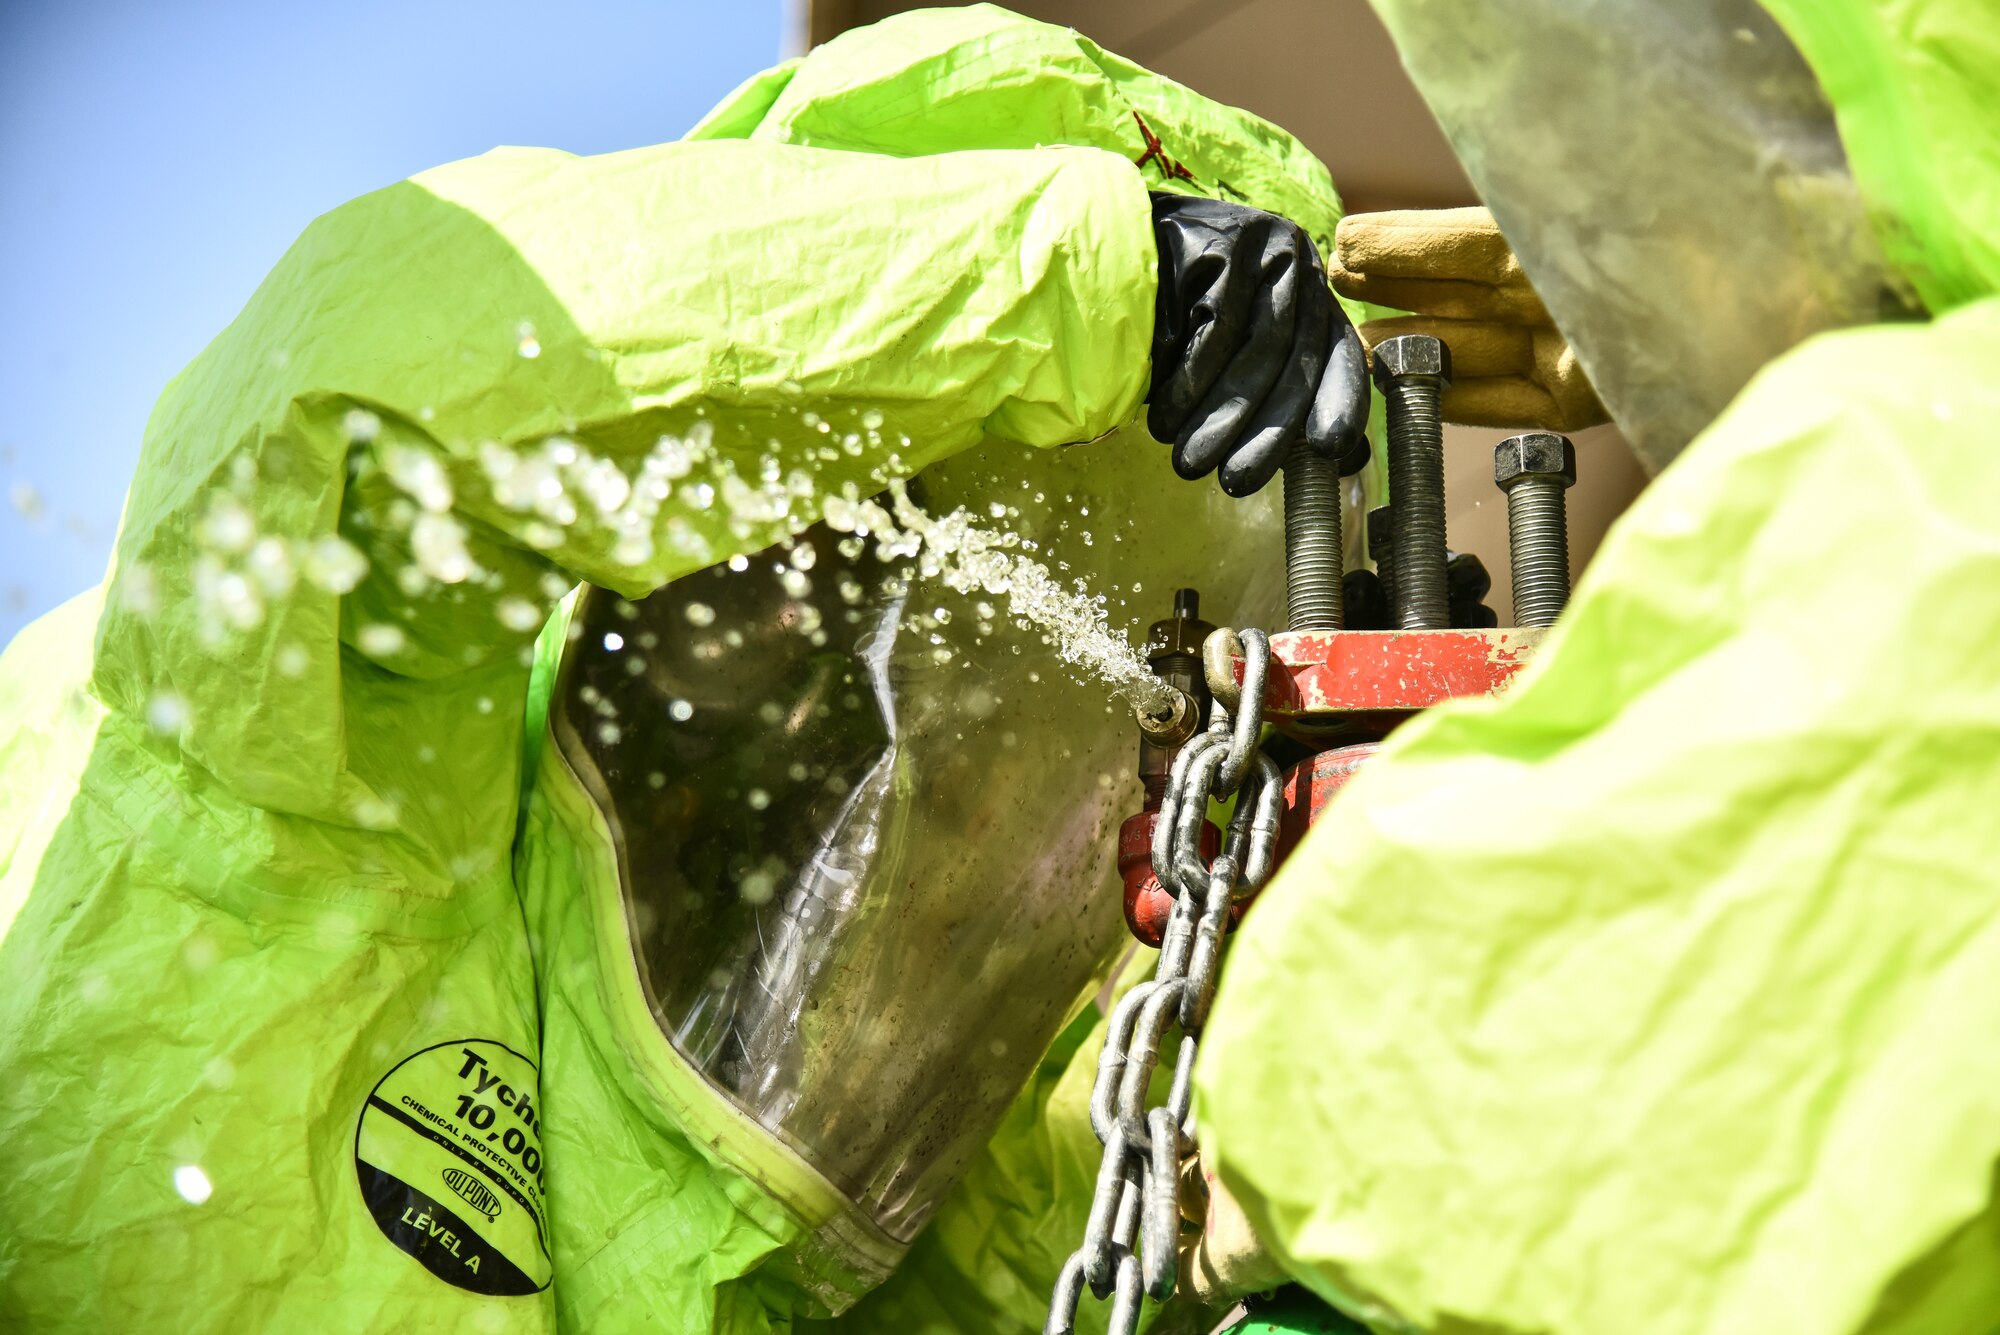 U.S. Airmen assigned to the 380th Expeditionary Civil Engineer Squadron Emergency Management flight cap a leaking gate valve of a simulated pressurized chlorine cylinder during a hazardous materials exercise at Al Dhafra Air Base, United Arab Emirates, Jan. 4, 2019. The exercise was designed to be a Department of Defense certification for three Airmen in the fire department and an annual refresher training for the EM flight. The Airmen were instructed to contain leaks on a pressurized chlorine cylinder, a one-ton cryo-tank, and a rail car, all after donning a Level-A suit. (U.S. Air Force photo by Senior Airman Mya M. Crosby)